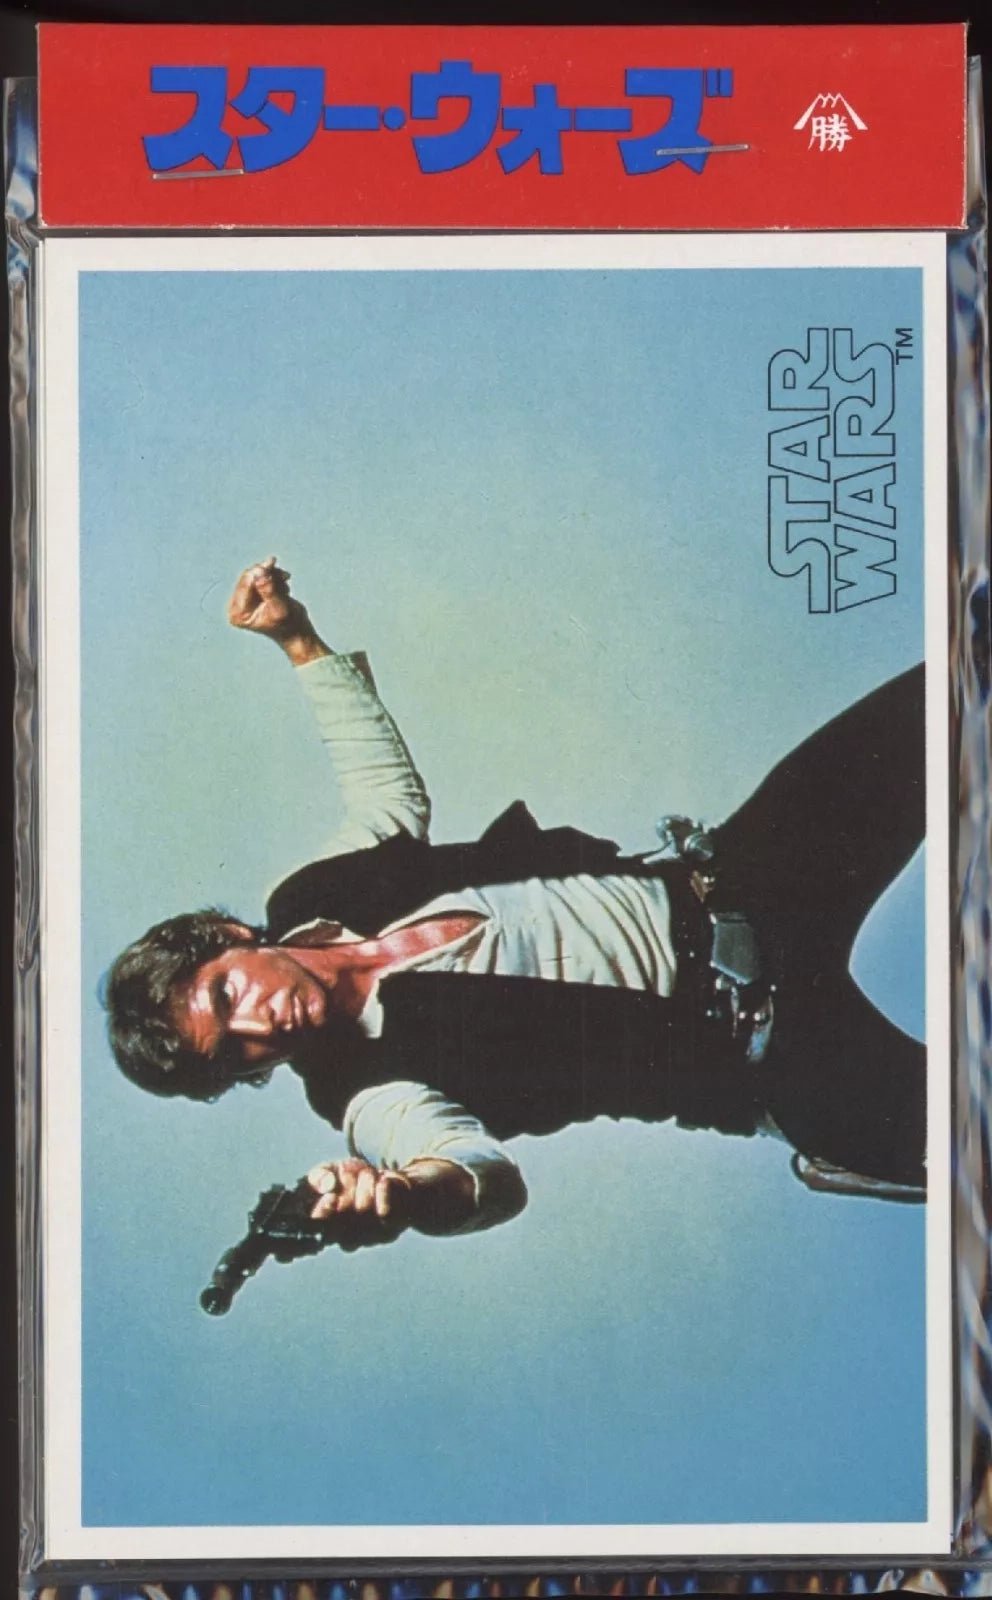 HAN SOLO 1977 Star Wars Japan Topps Yamakatsu Large Sealed Pack of 4 Cards Star Wars Sealed Pack - Hobby Gems